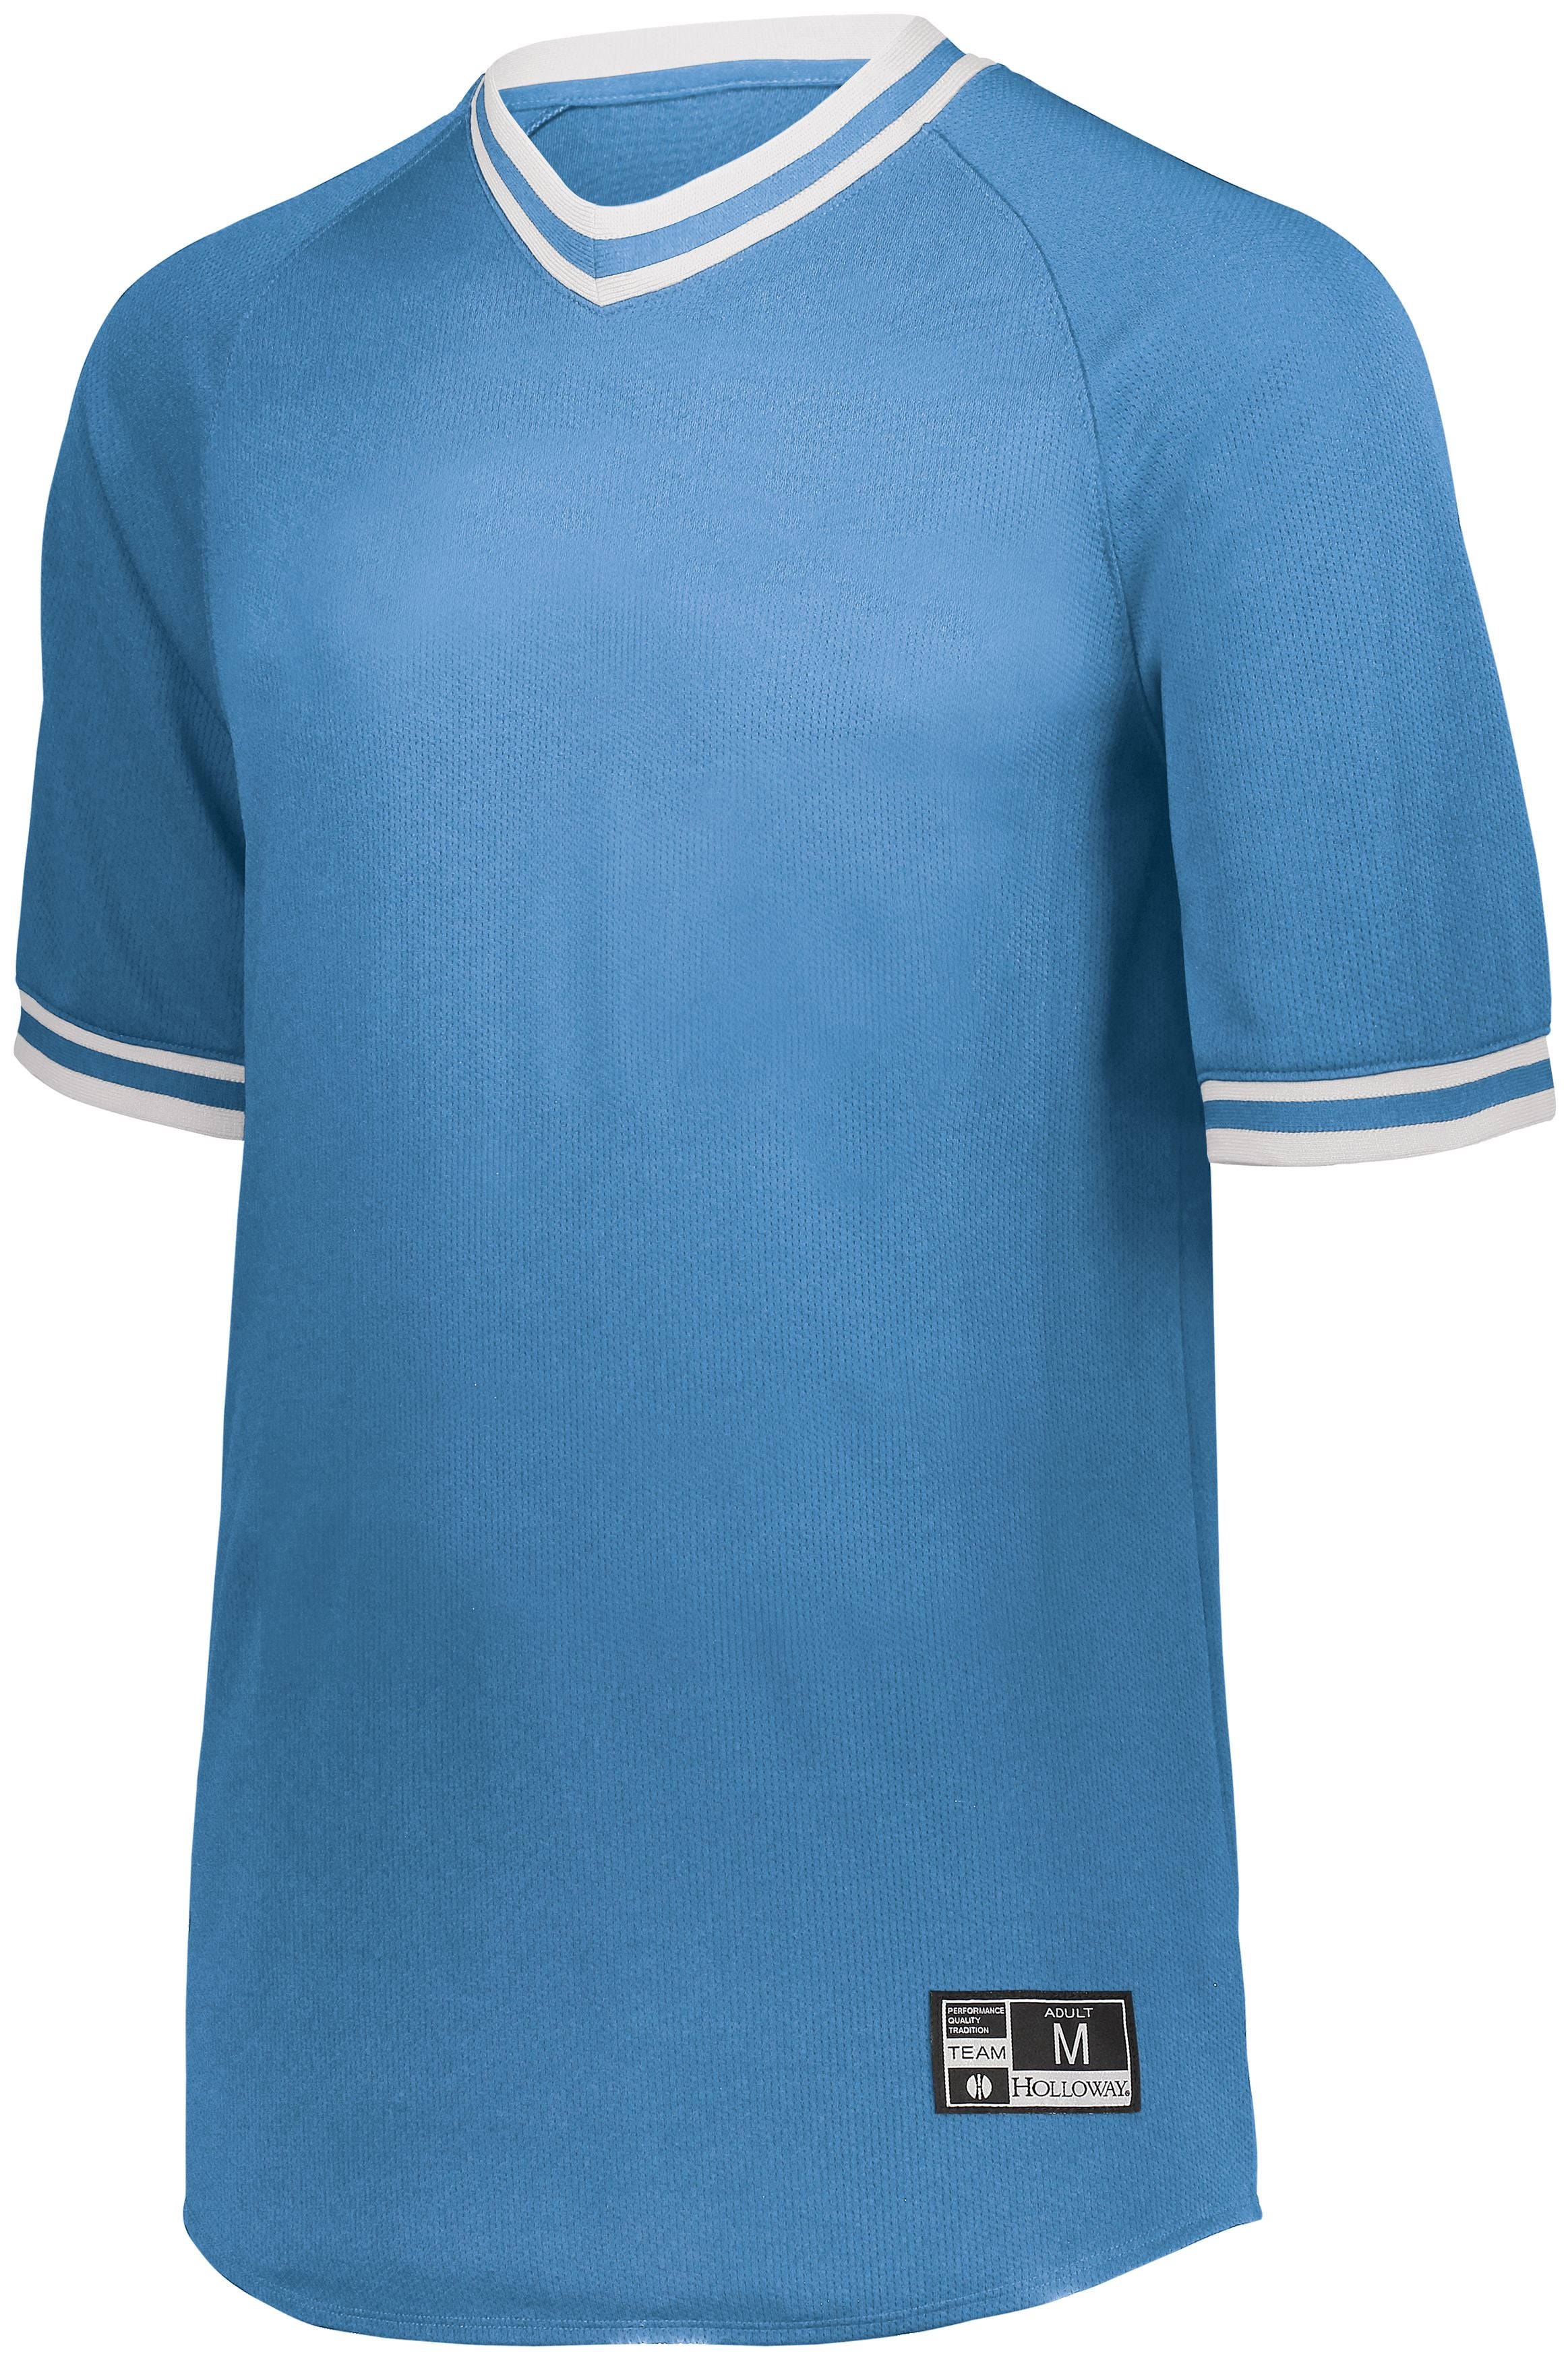 Holloway Retro V-Neck Baseball Jersey in University Blue/White  -Part of the Adult, Adult-Jersey, Baseball, Holloway, Shirts, All-Sports, All-Sports-1 product lines at KanaleyCreations.com